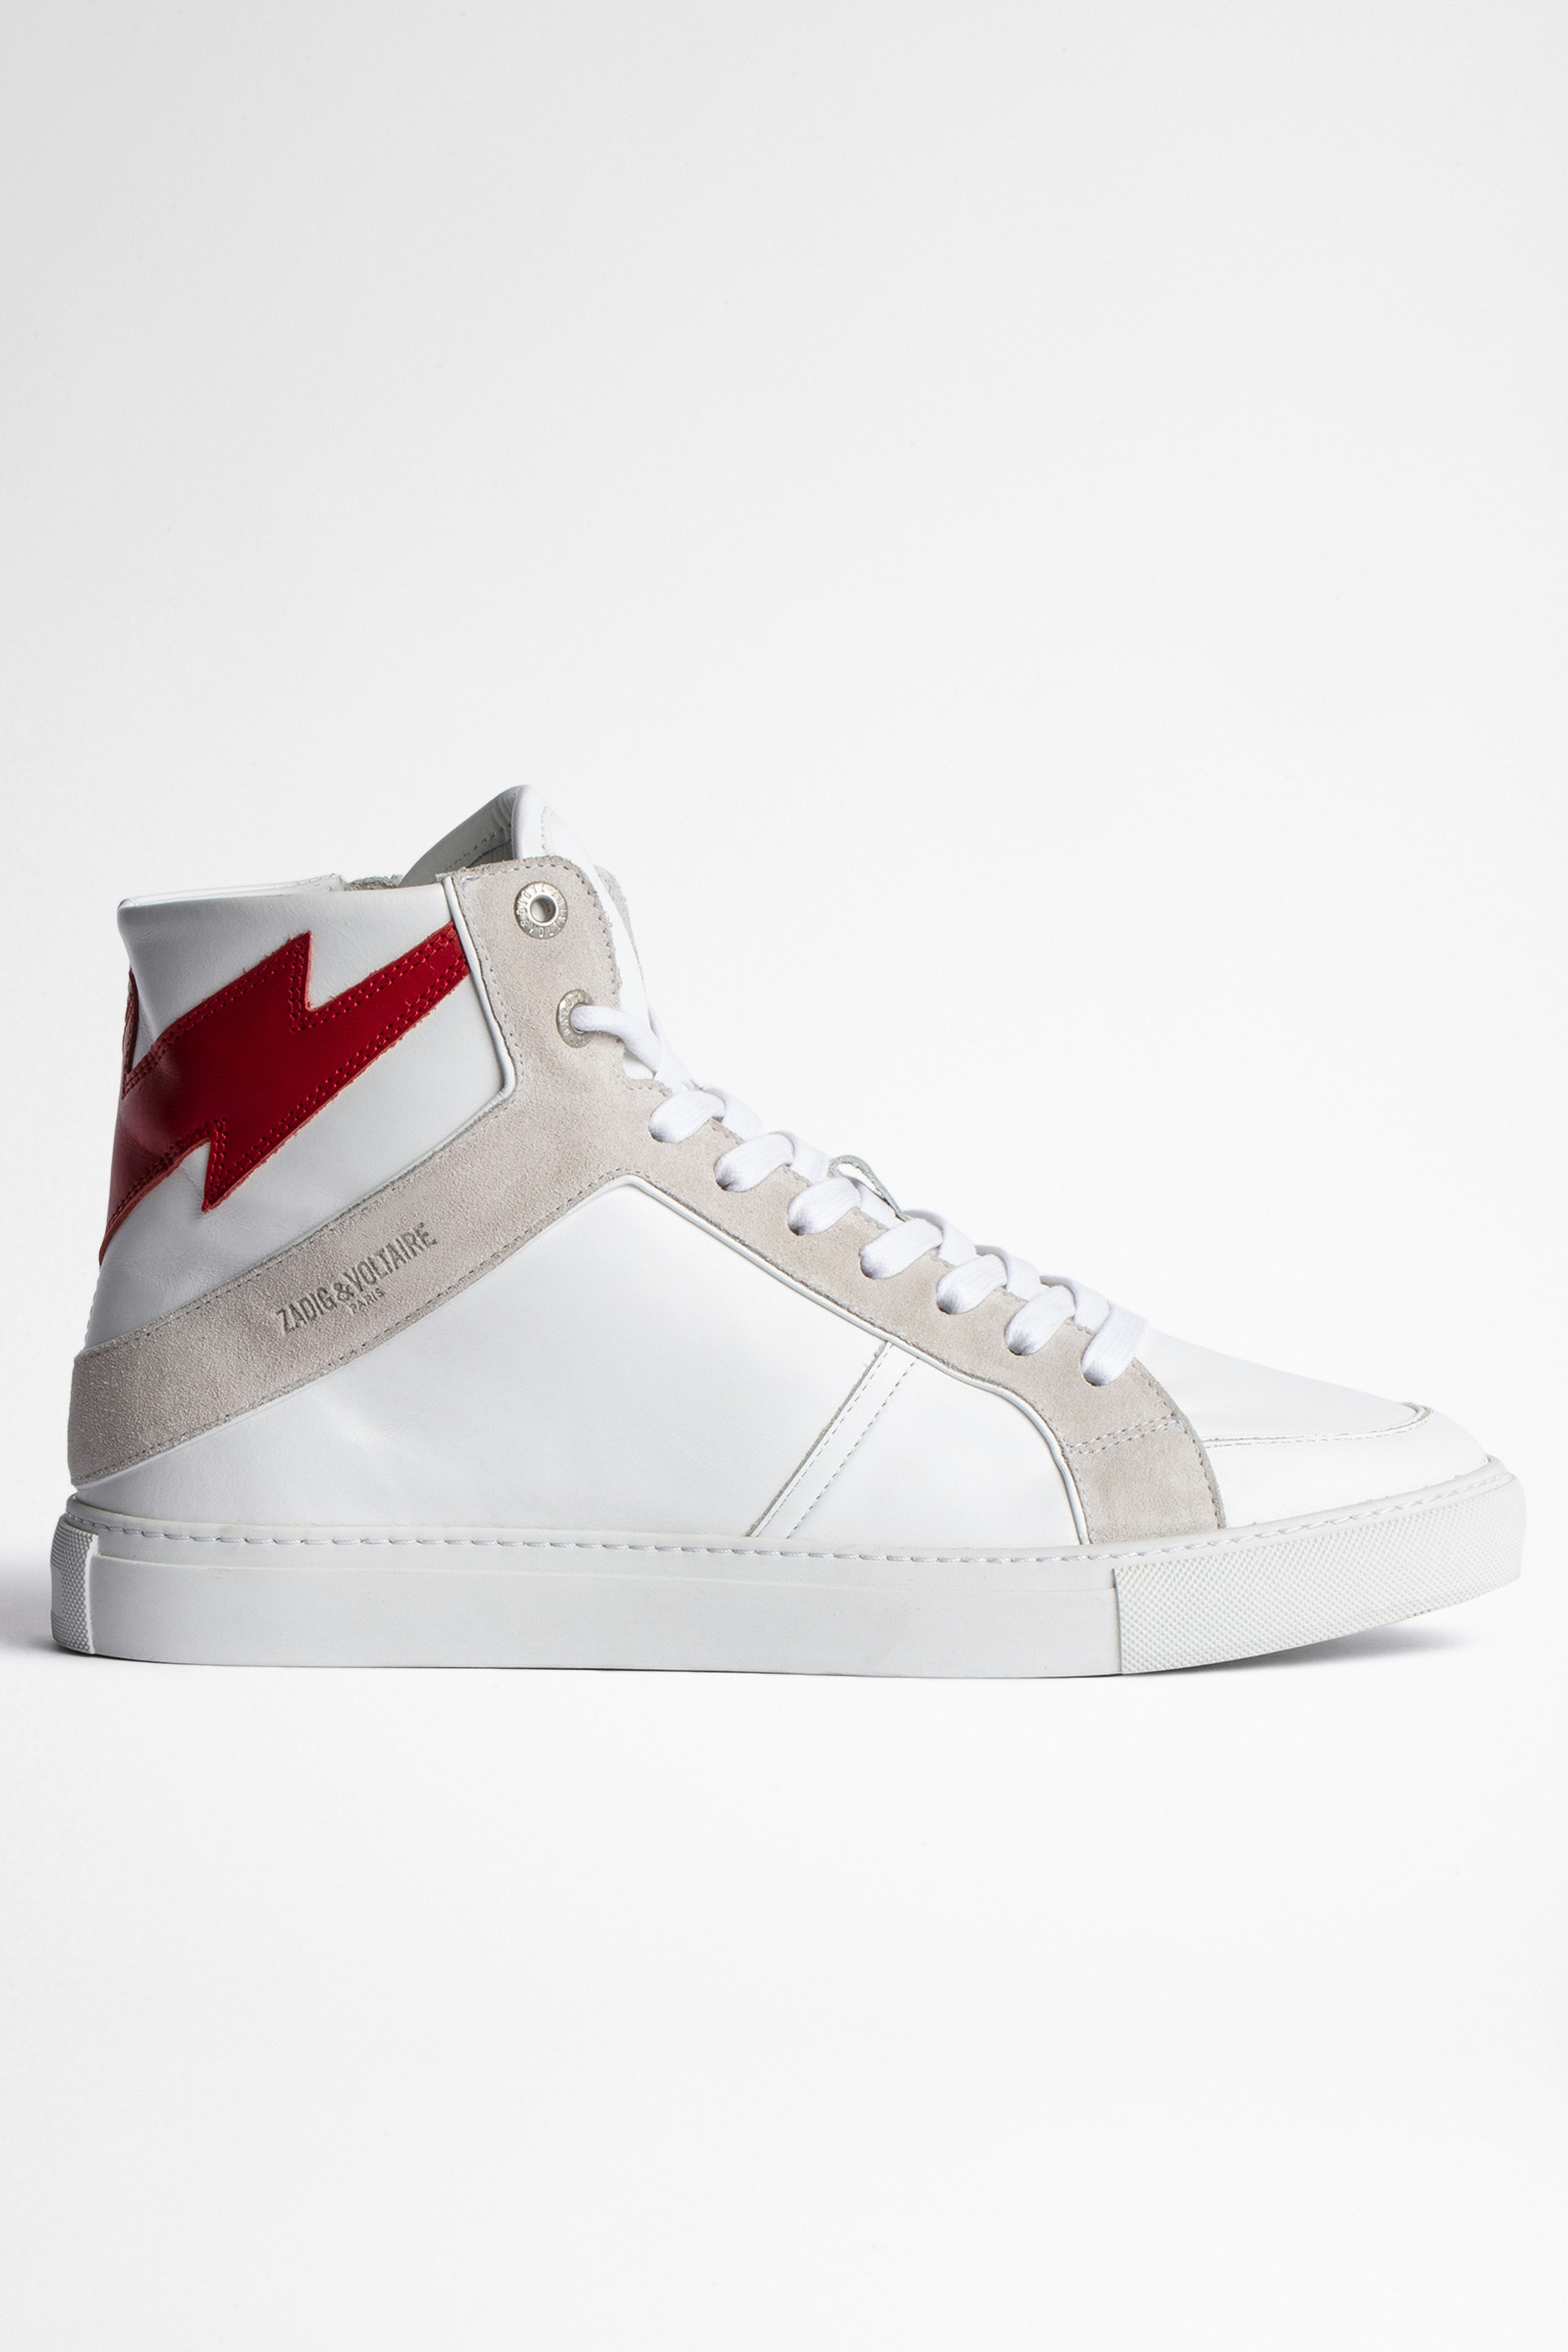 ZV1747 High Flash Trainers Men’s white leather high-top sneakers with contrasting lightning bolt insert